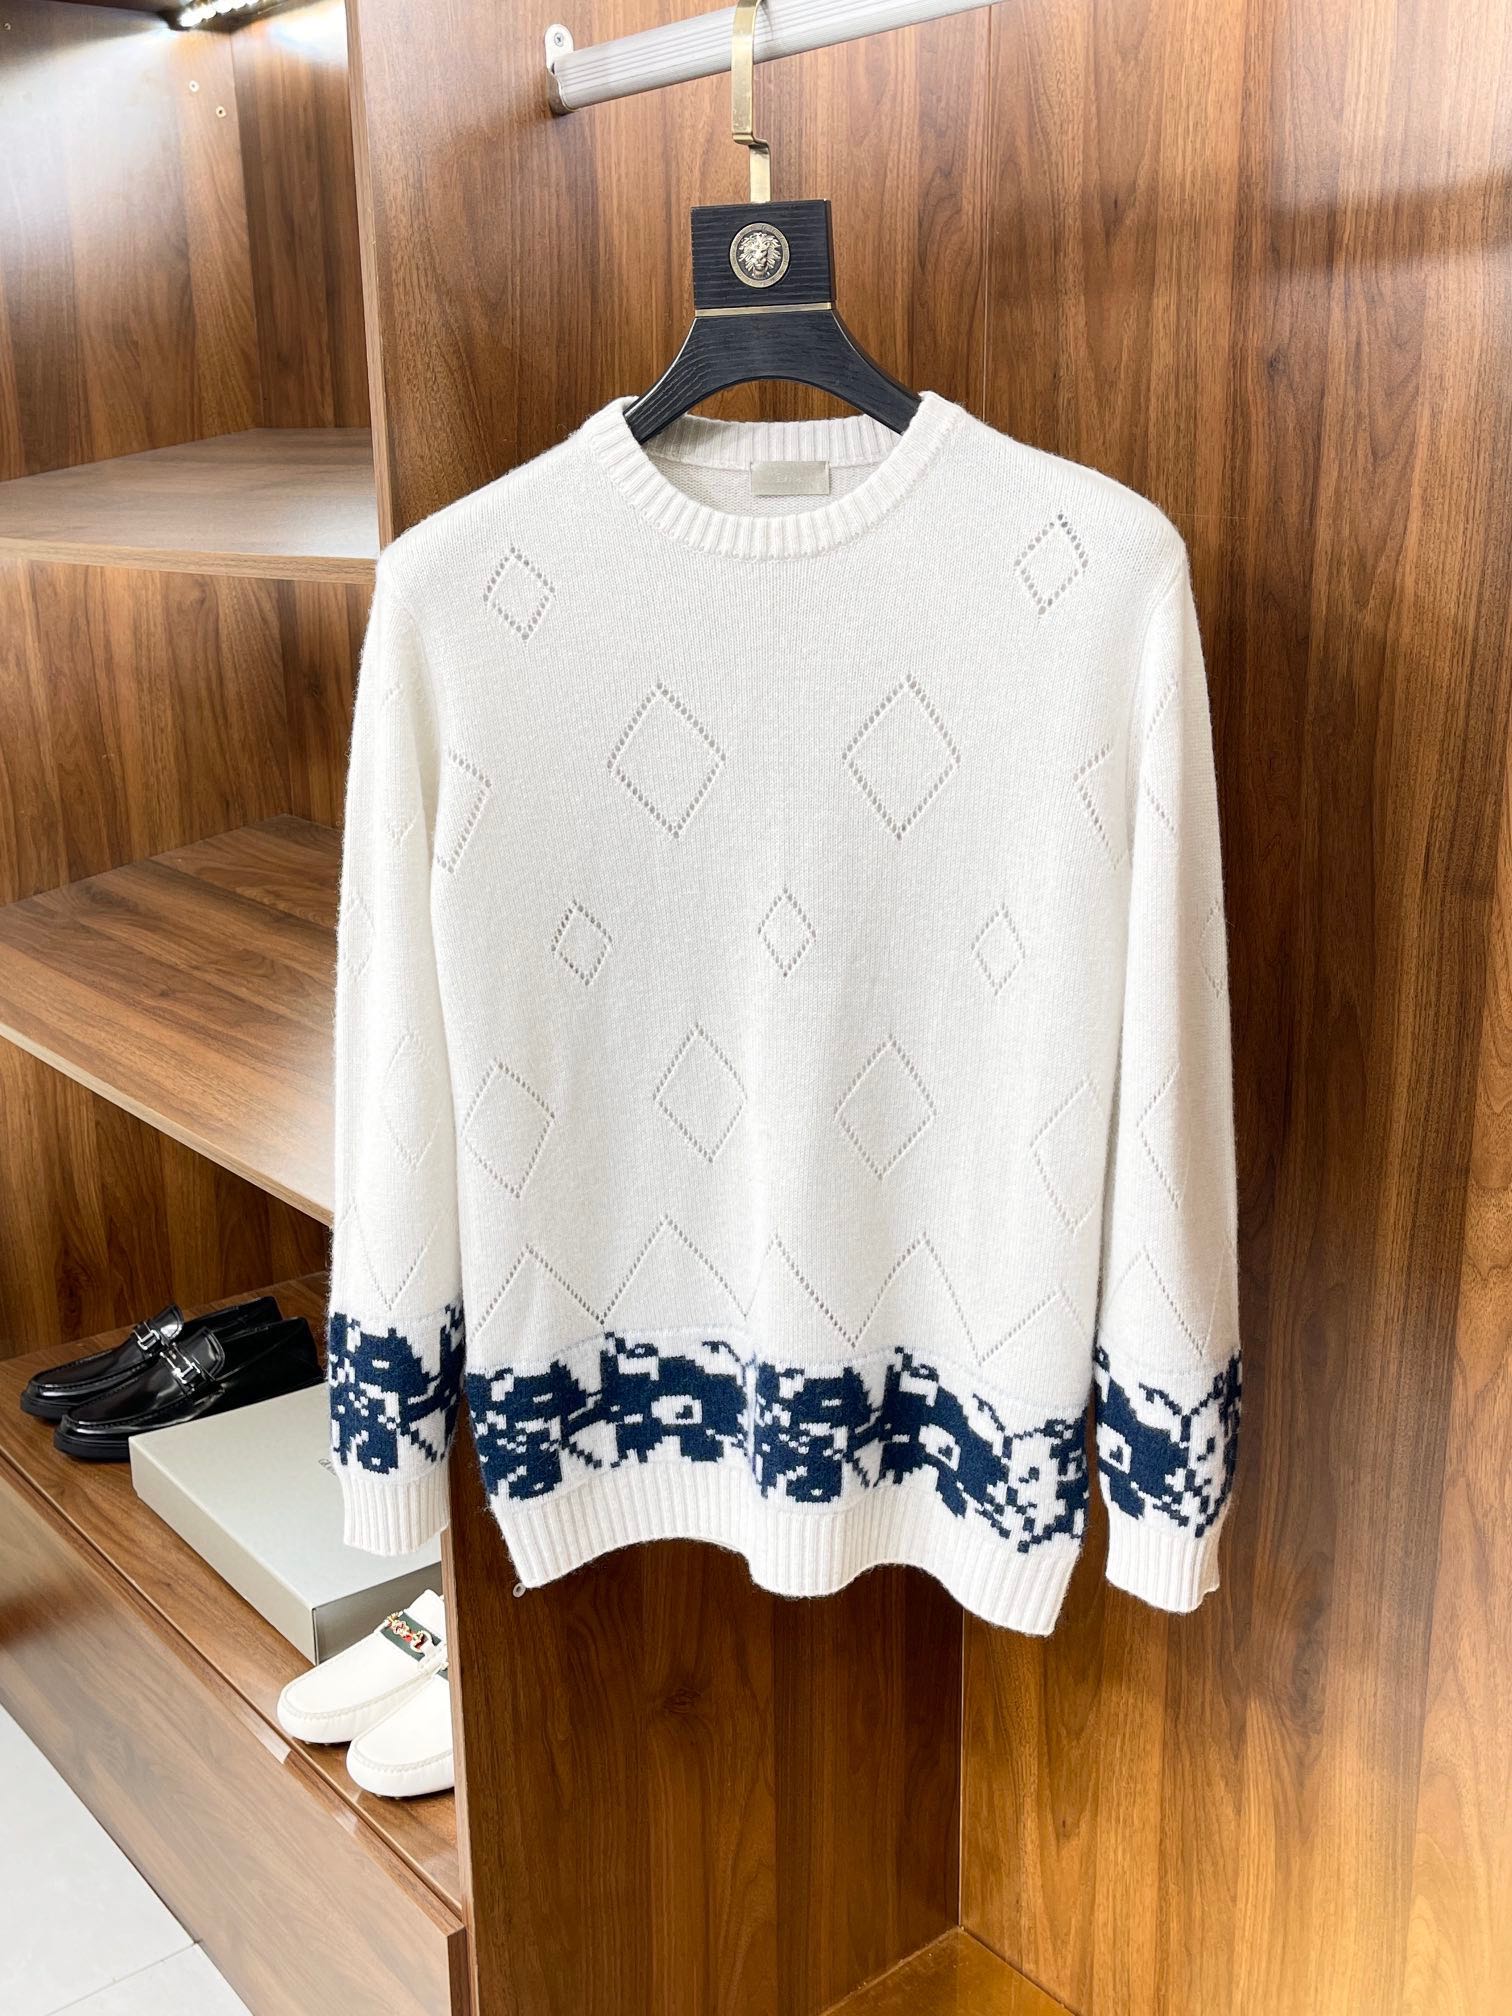 Dior Clothing Knit Sweater Sweatshirts Openwork Cashmere Knitting Wool Fall/Winter Collection Fashion